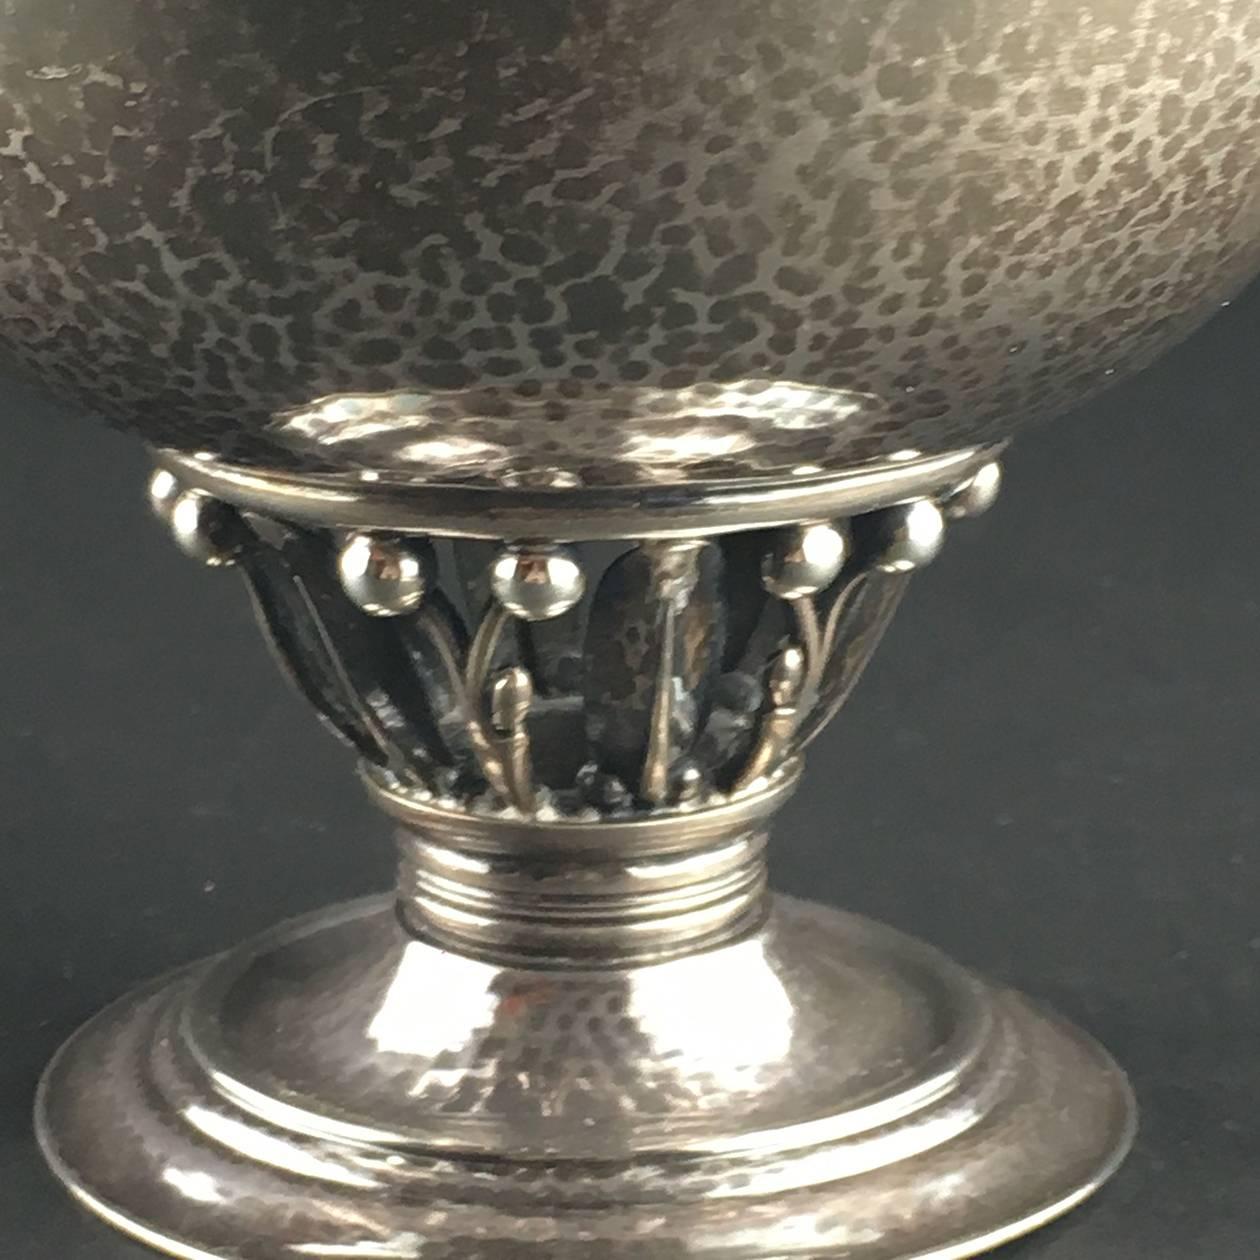 Danish Georg Jensen Silver covered bowl on stepped circular base, the openwork berry stem supporting a circular bowl with everted rim, the cover with berry finial. The form often referred to as 